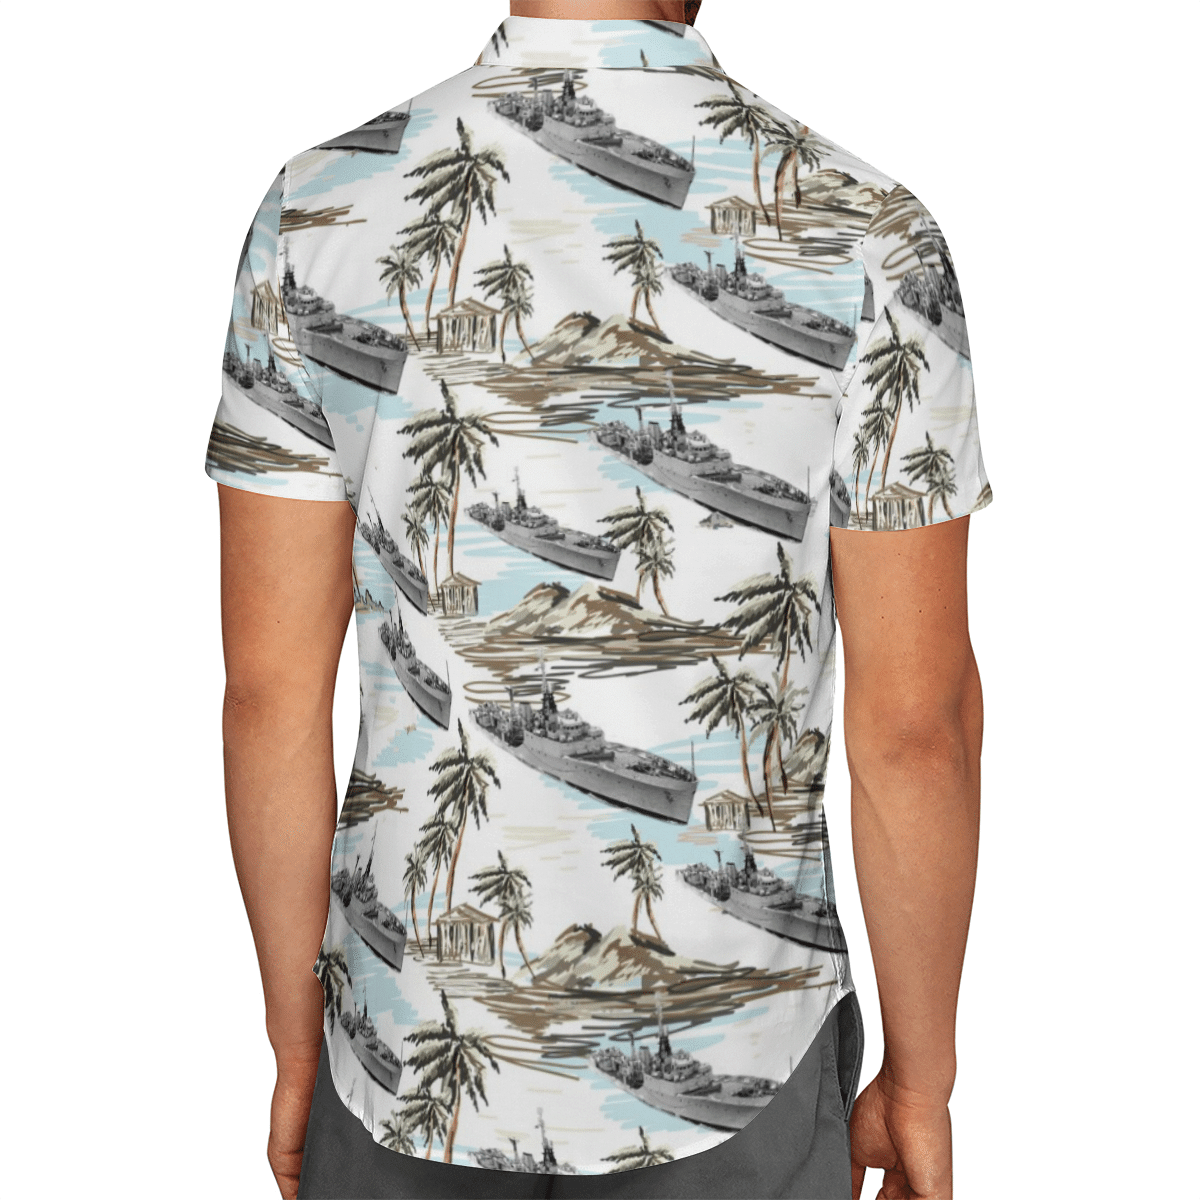 Going to the beach with a quality shirt 155